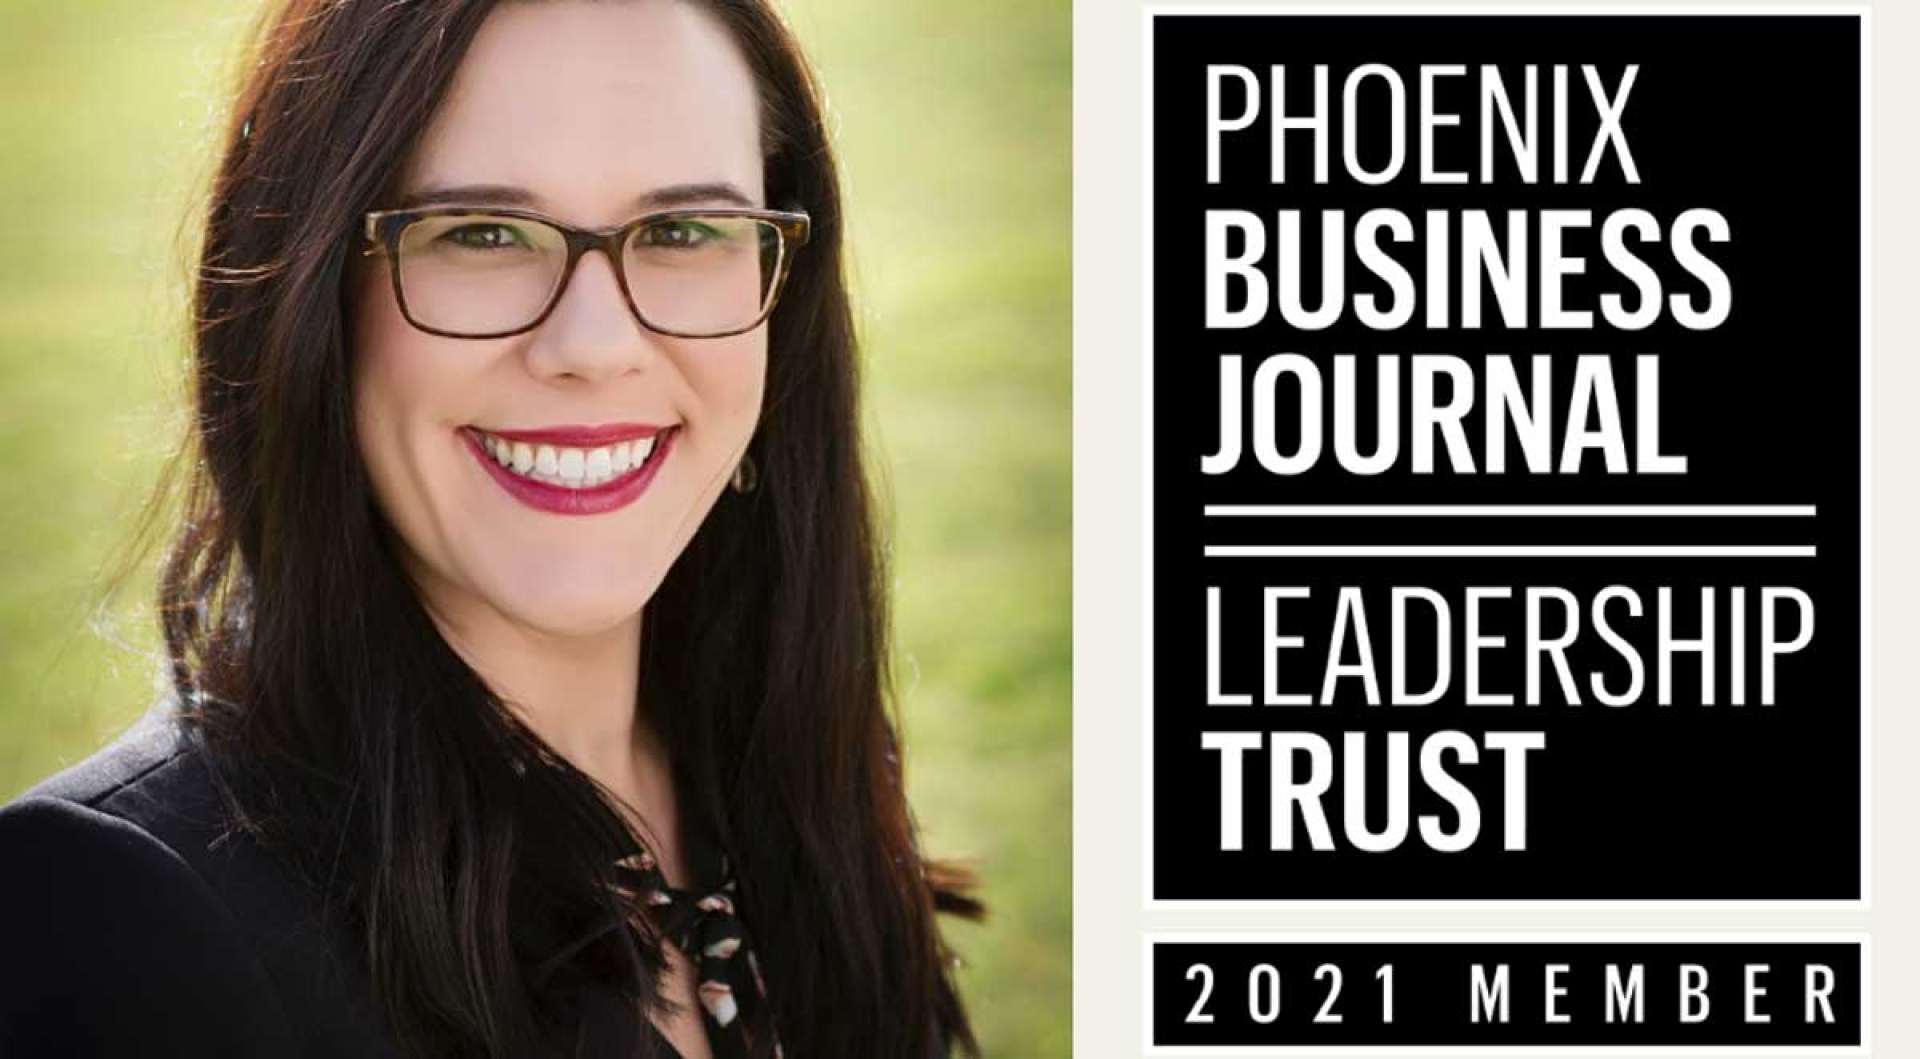 Dr. Kelly Van Sande invited to join the Phoenix Business Journal Leadership Trust